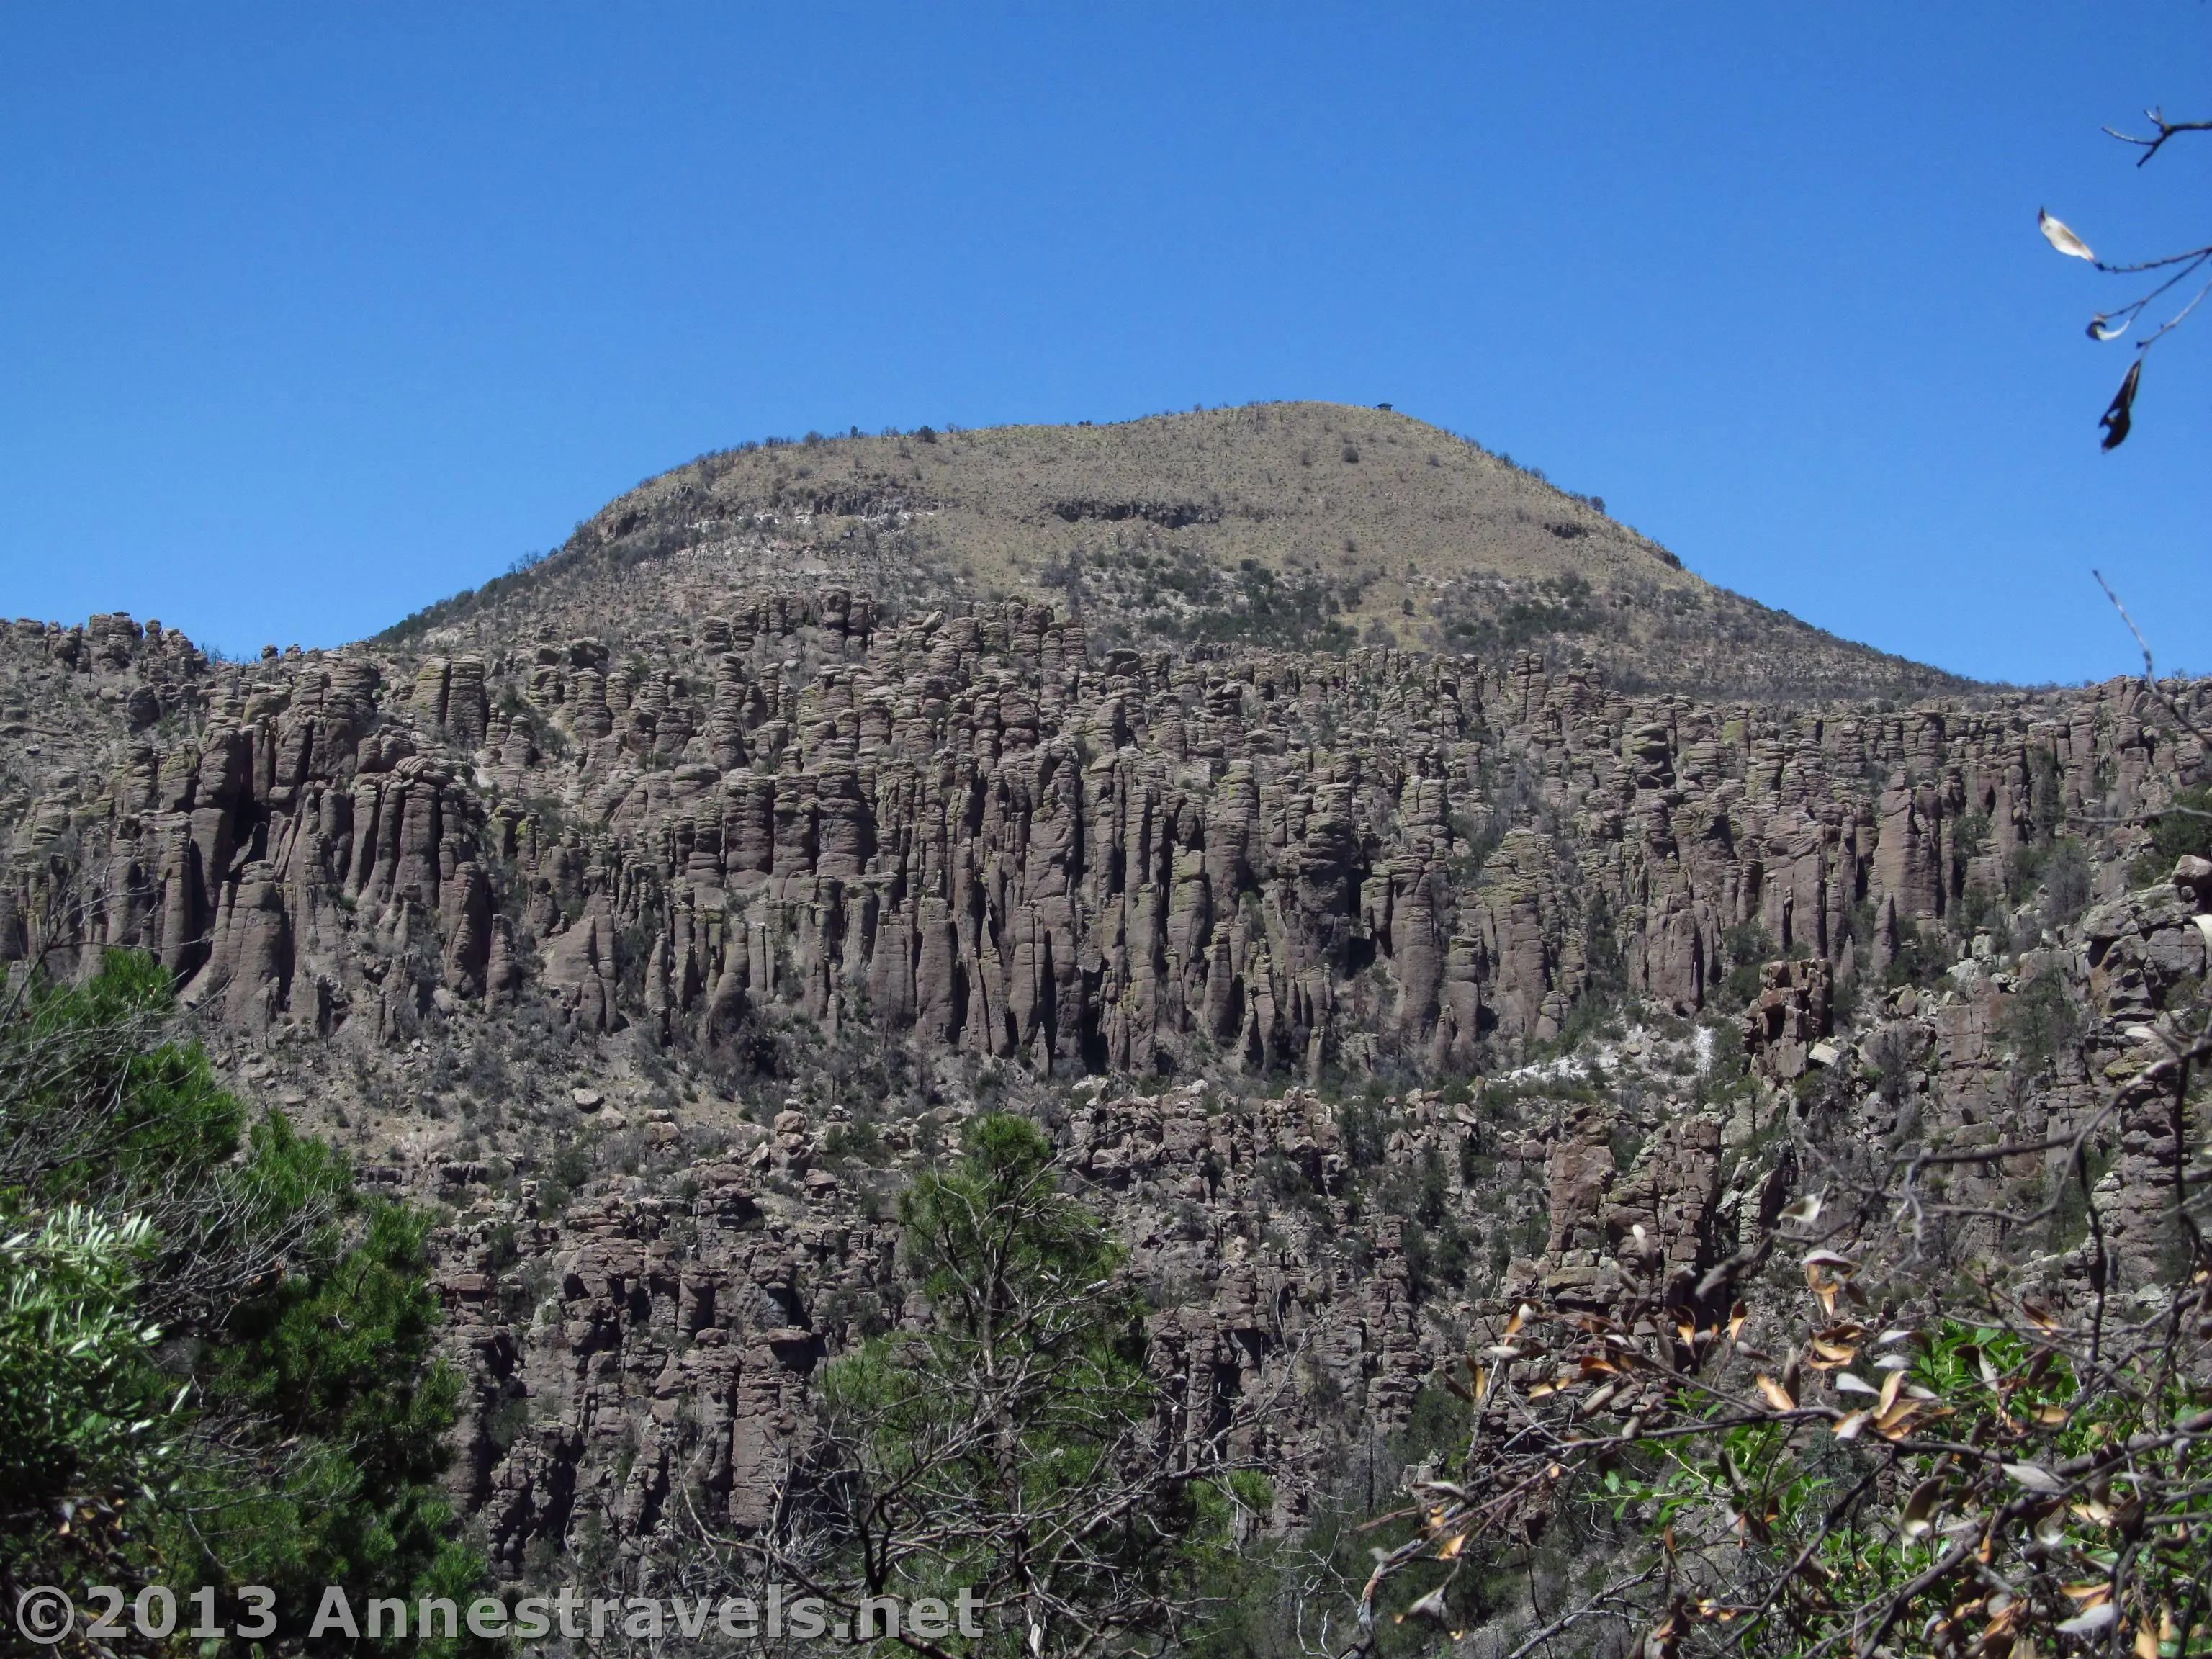 Views of Chiricahua Spires: Sarah Deming and Upper Rhyolite Trails